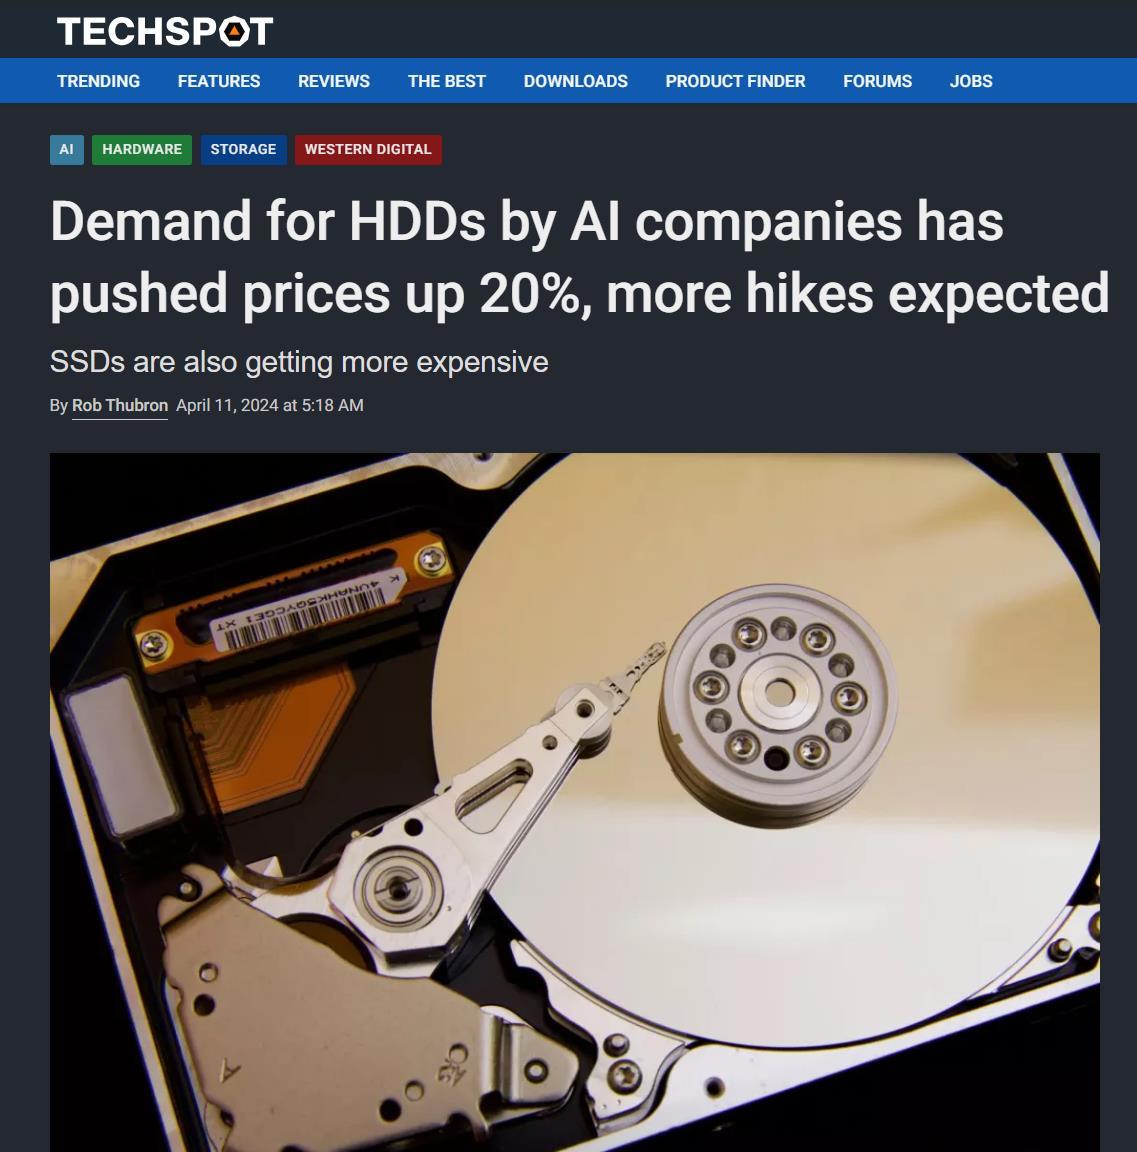 $Western Digital (WDC.US)$ ai helping this? [Share Link: Demand for HDDs by AI companies has pushed prices up 20%, more hikes expected]